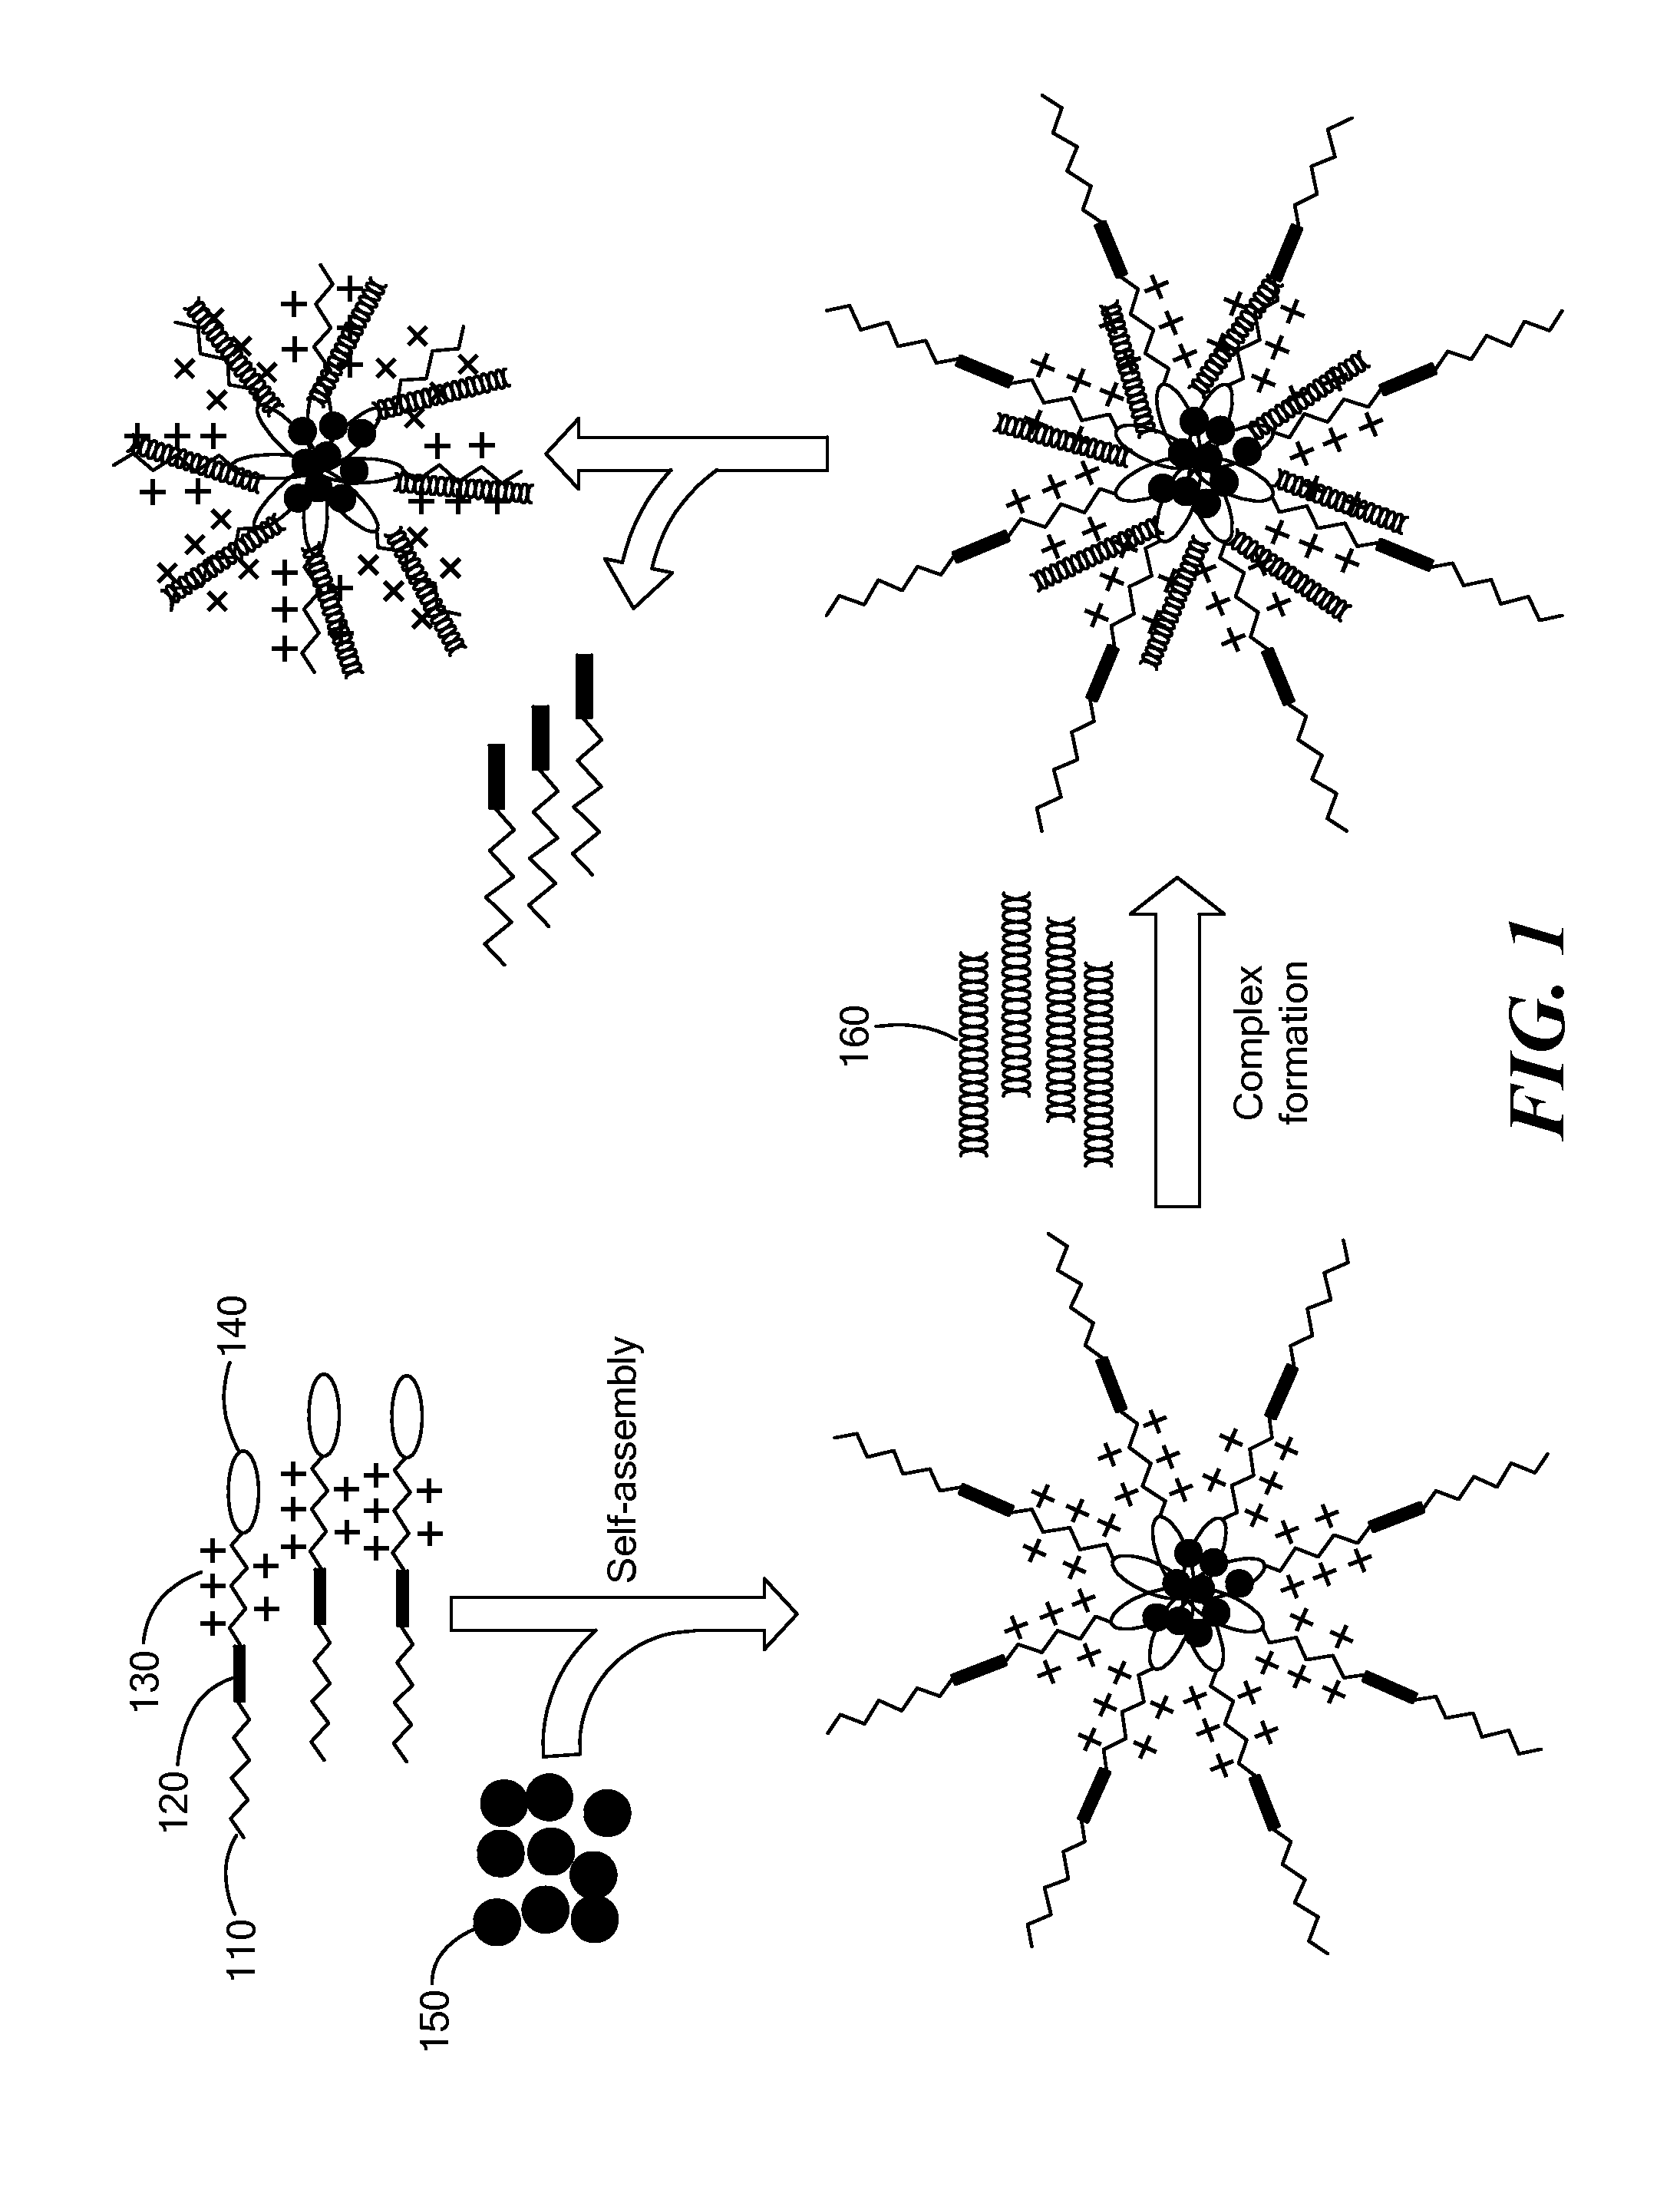 System for co-delivery of polynucleotides and drugs into protease-expressing cells